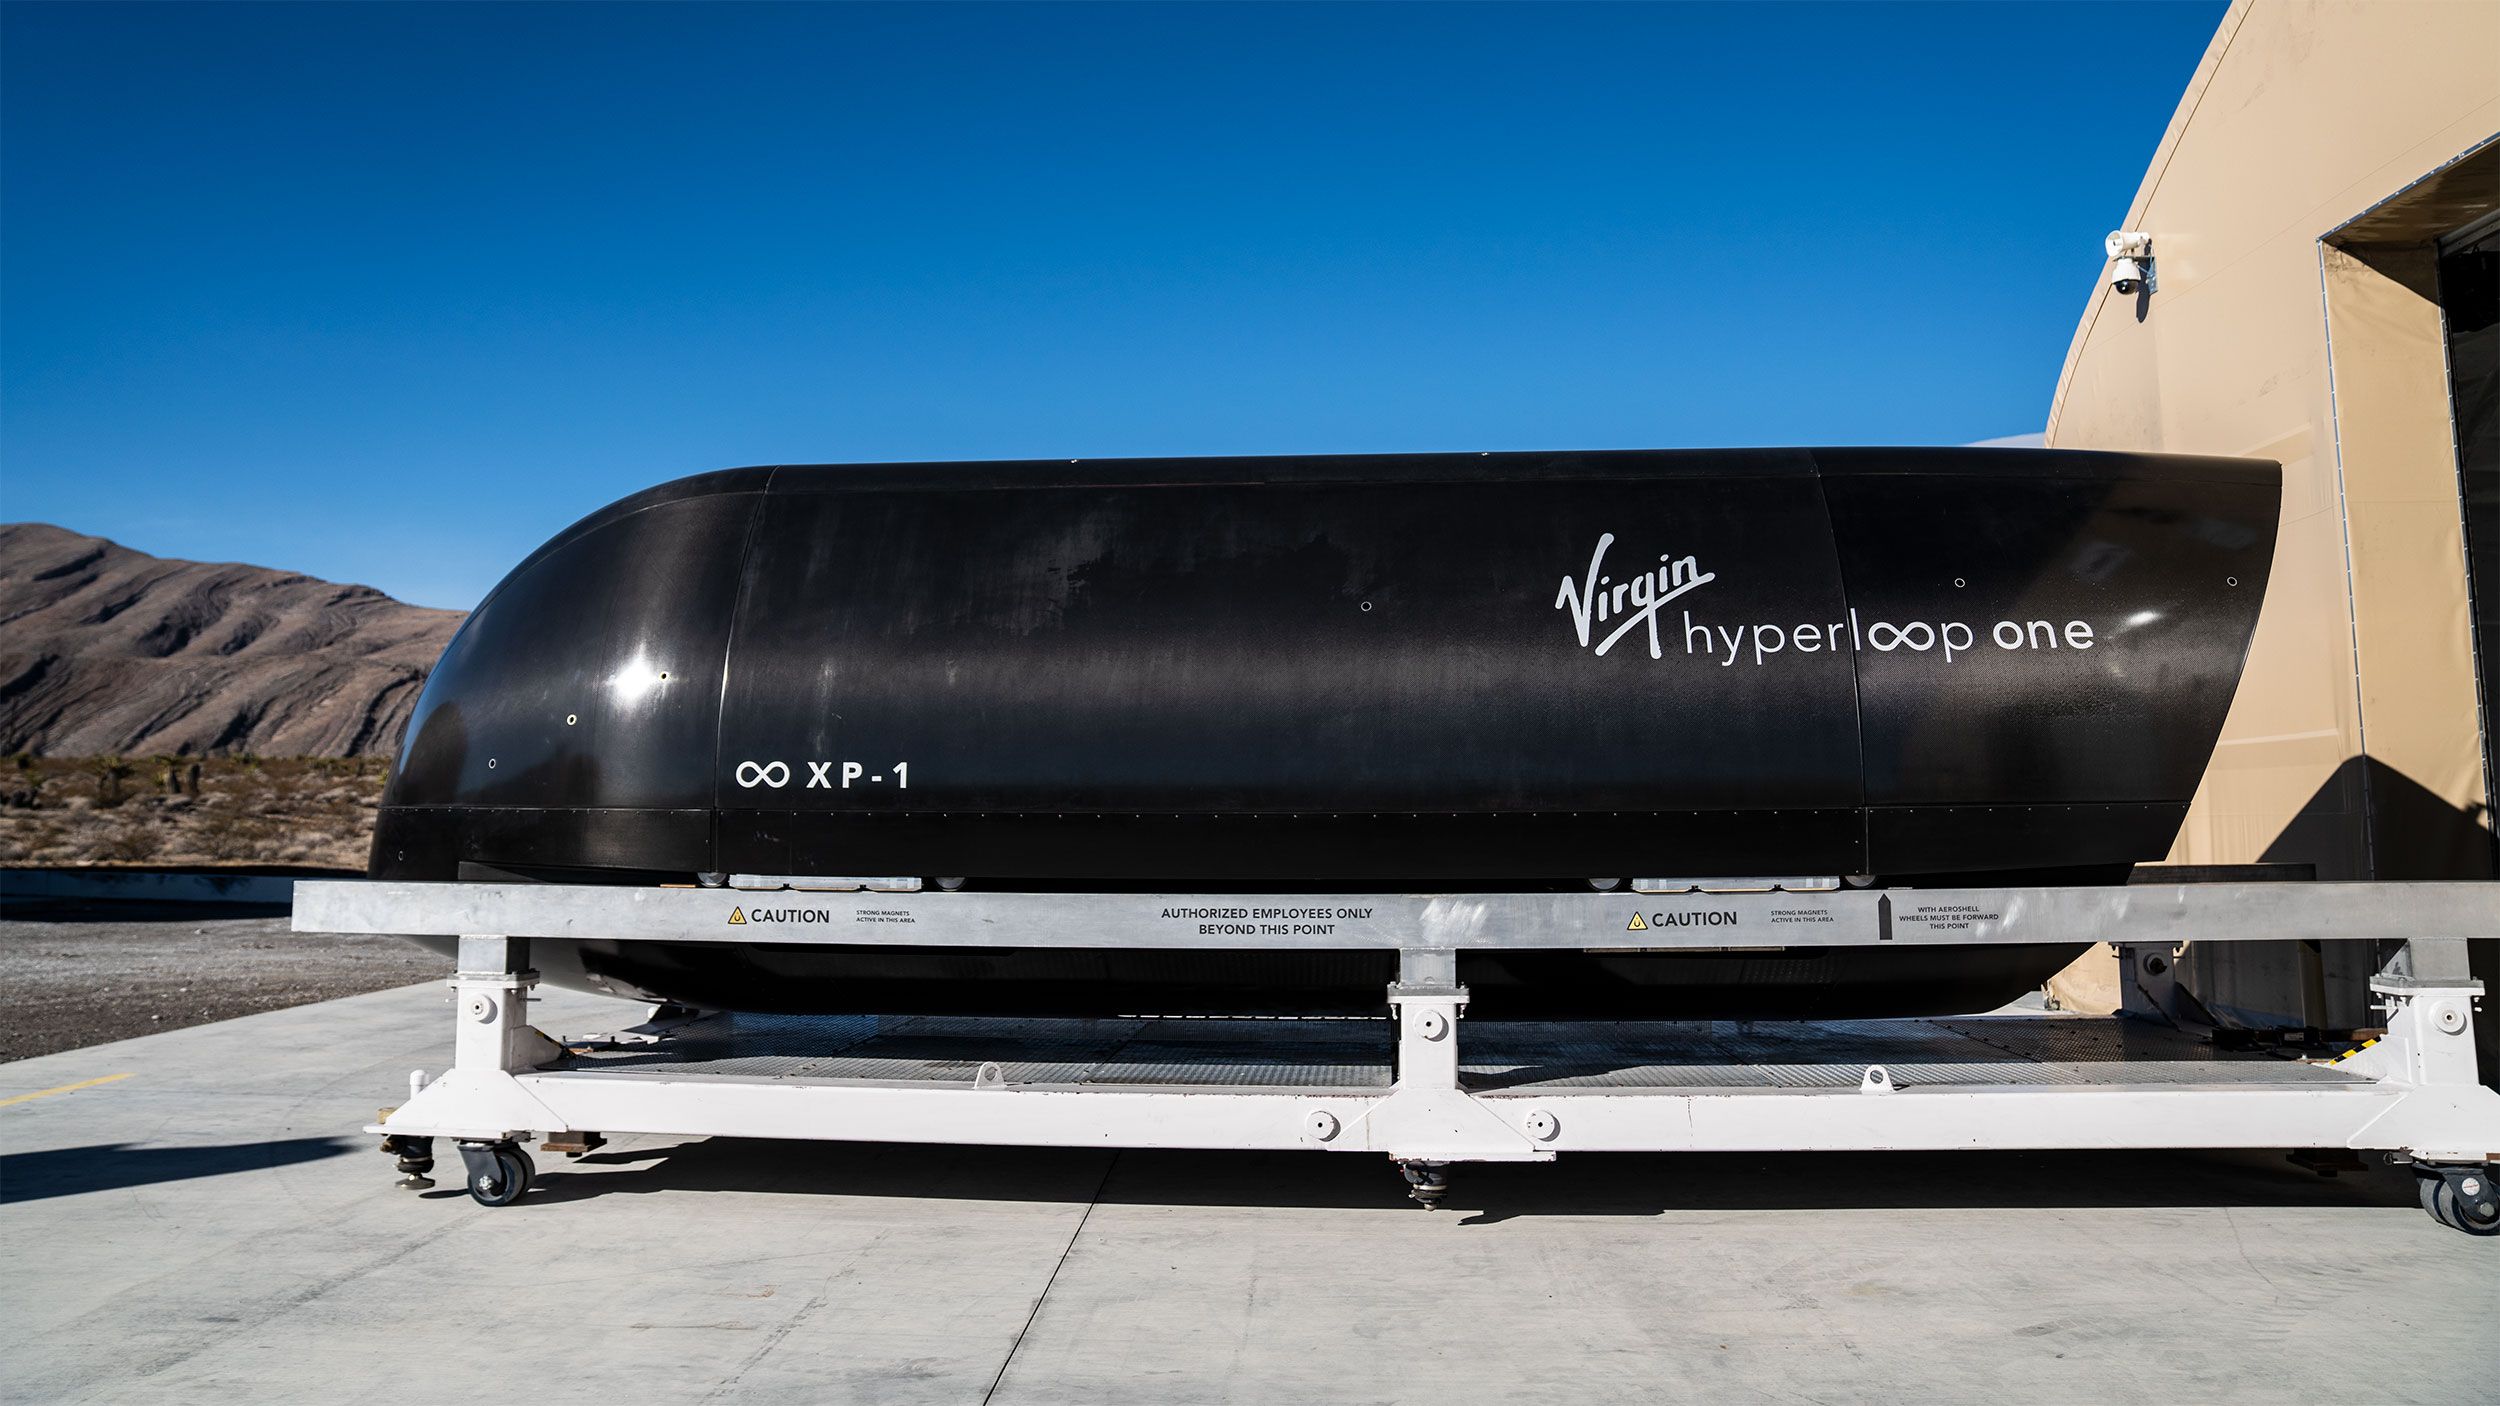 Ohio Announces Results of Hyperloop Feasibility Study